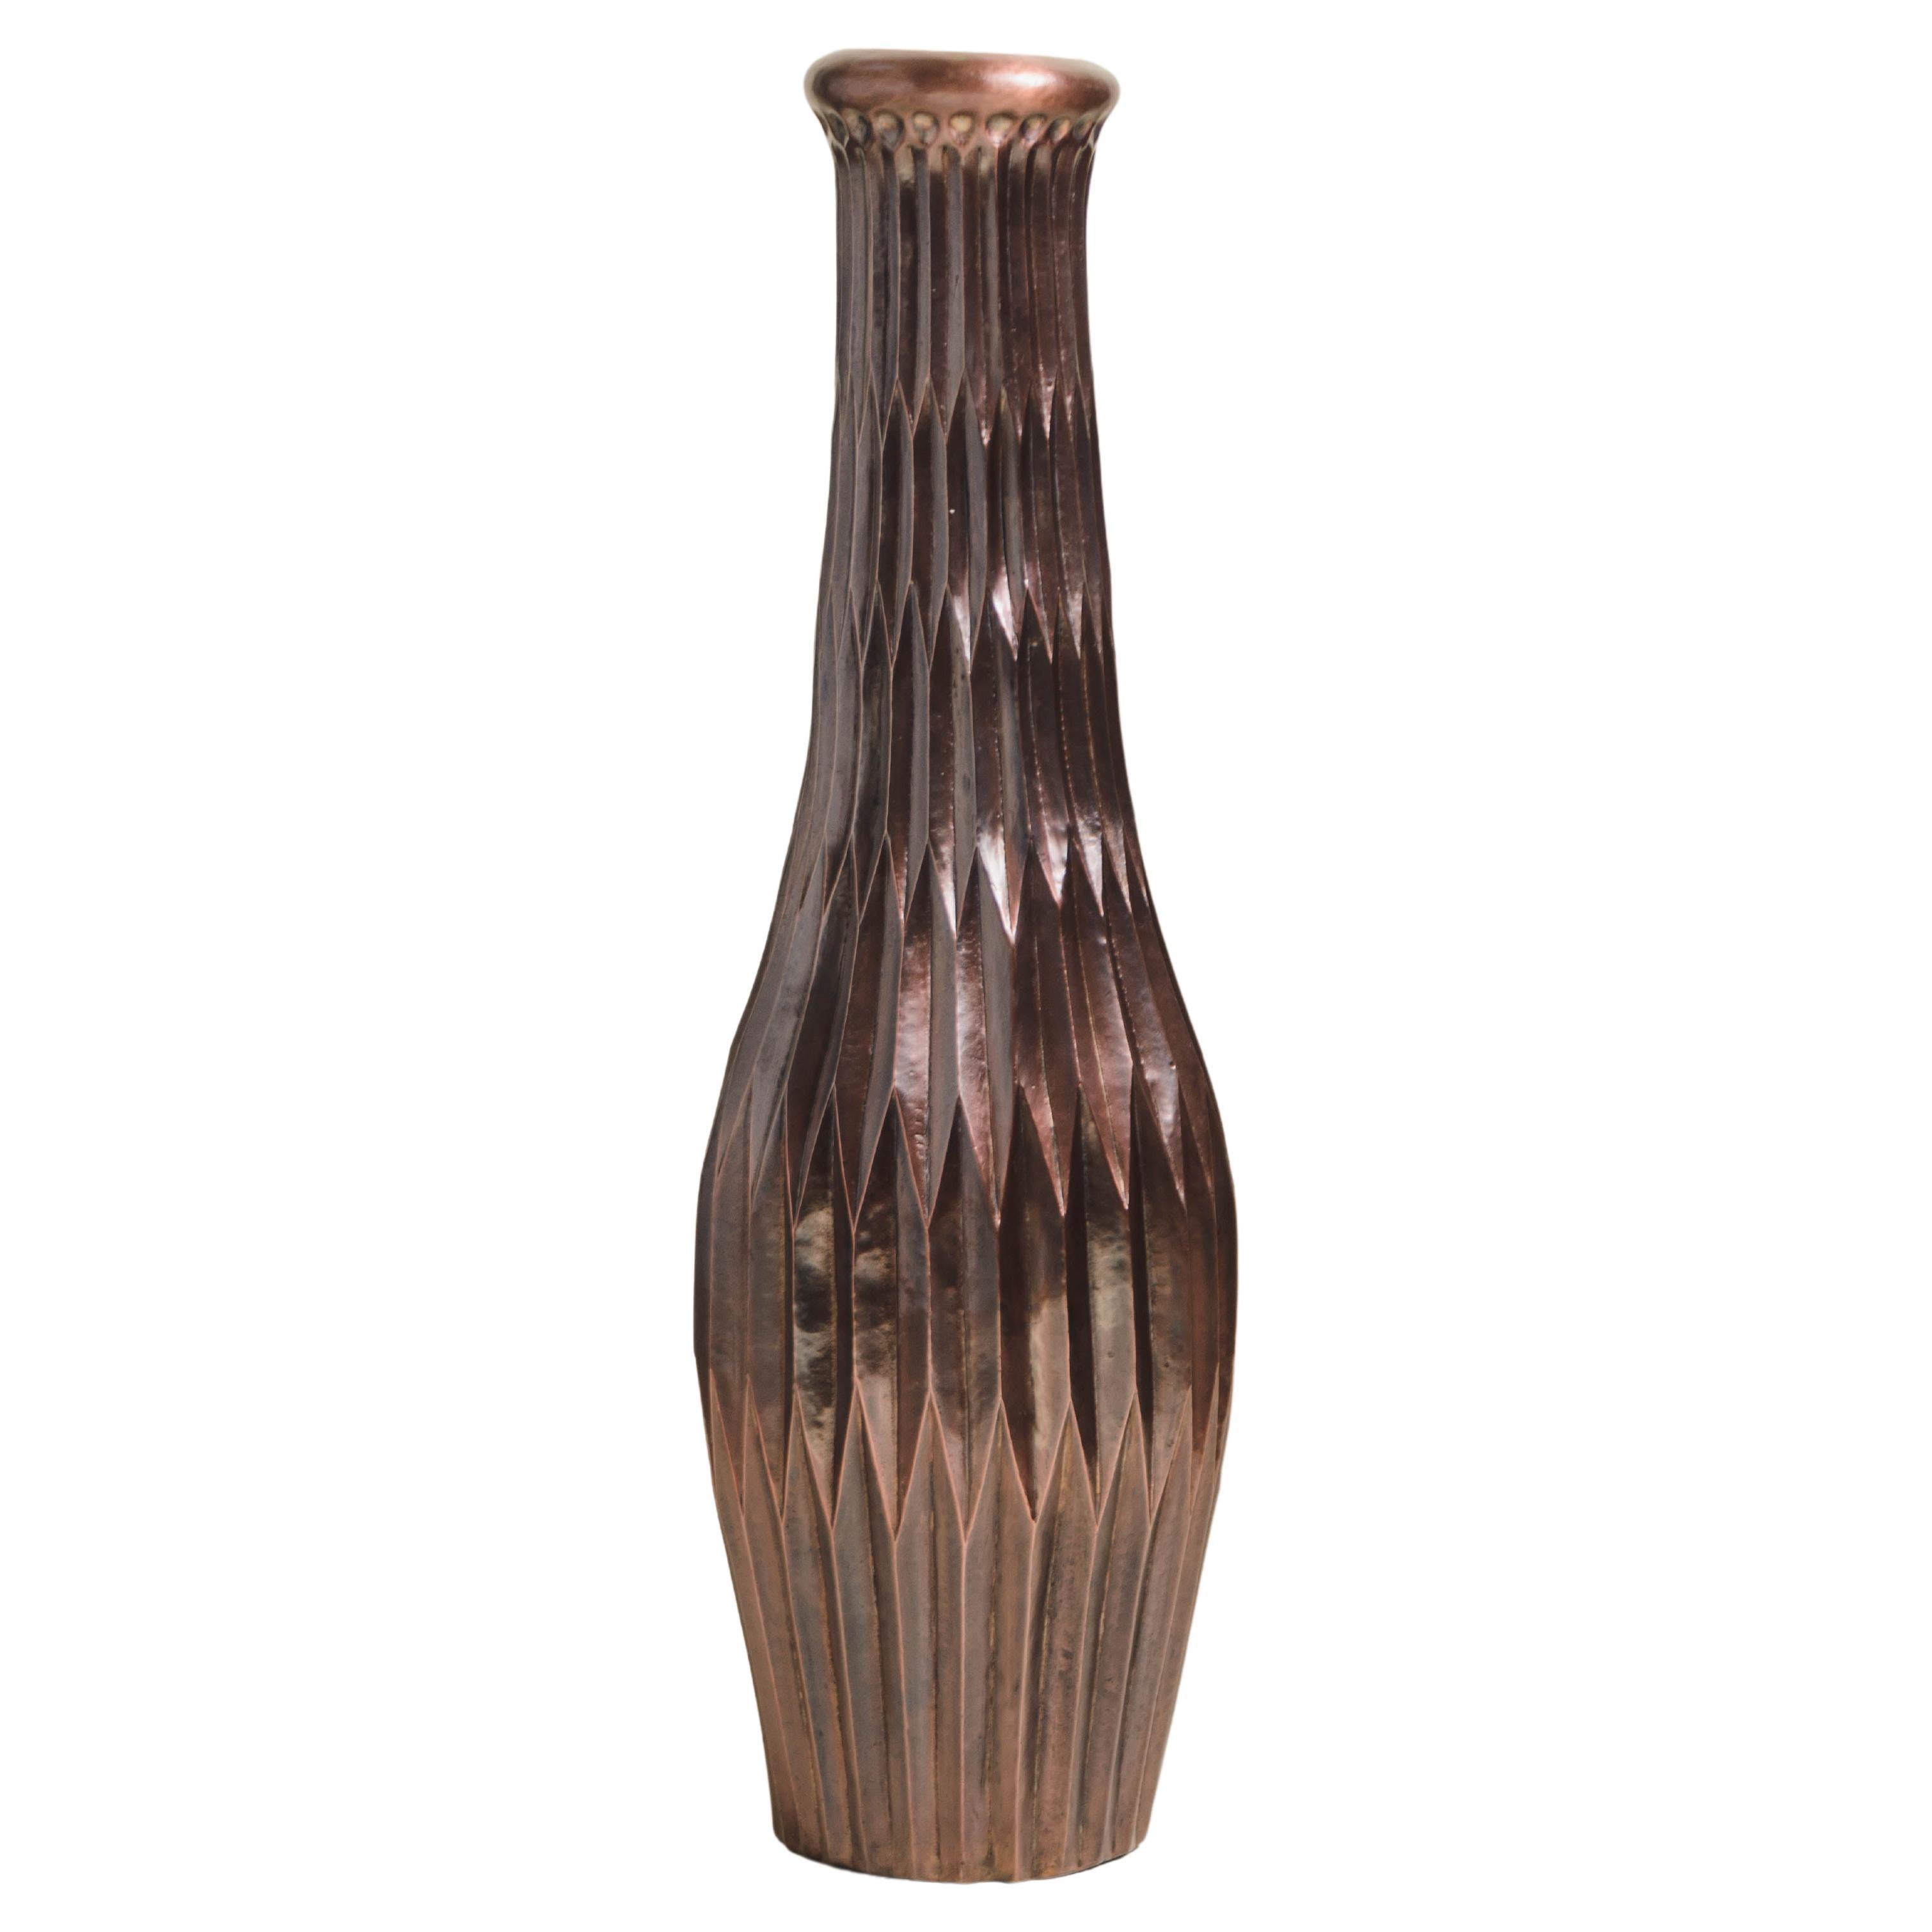 Contemporary Repoussé Tall Lantern Design Vase in Antique Copper by Robert Kuo For Sale